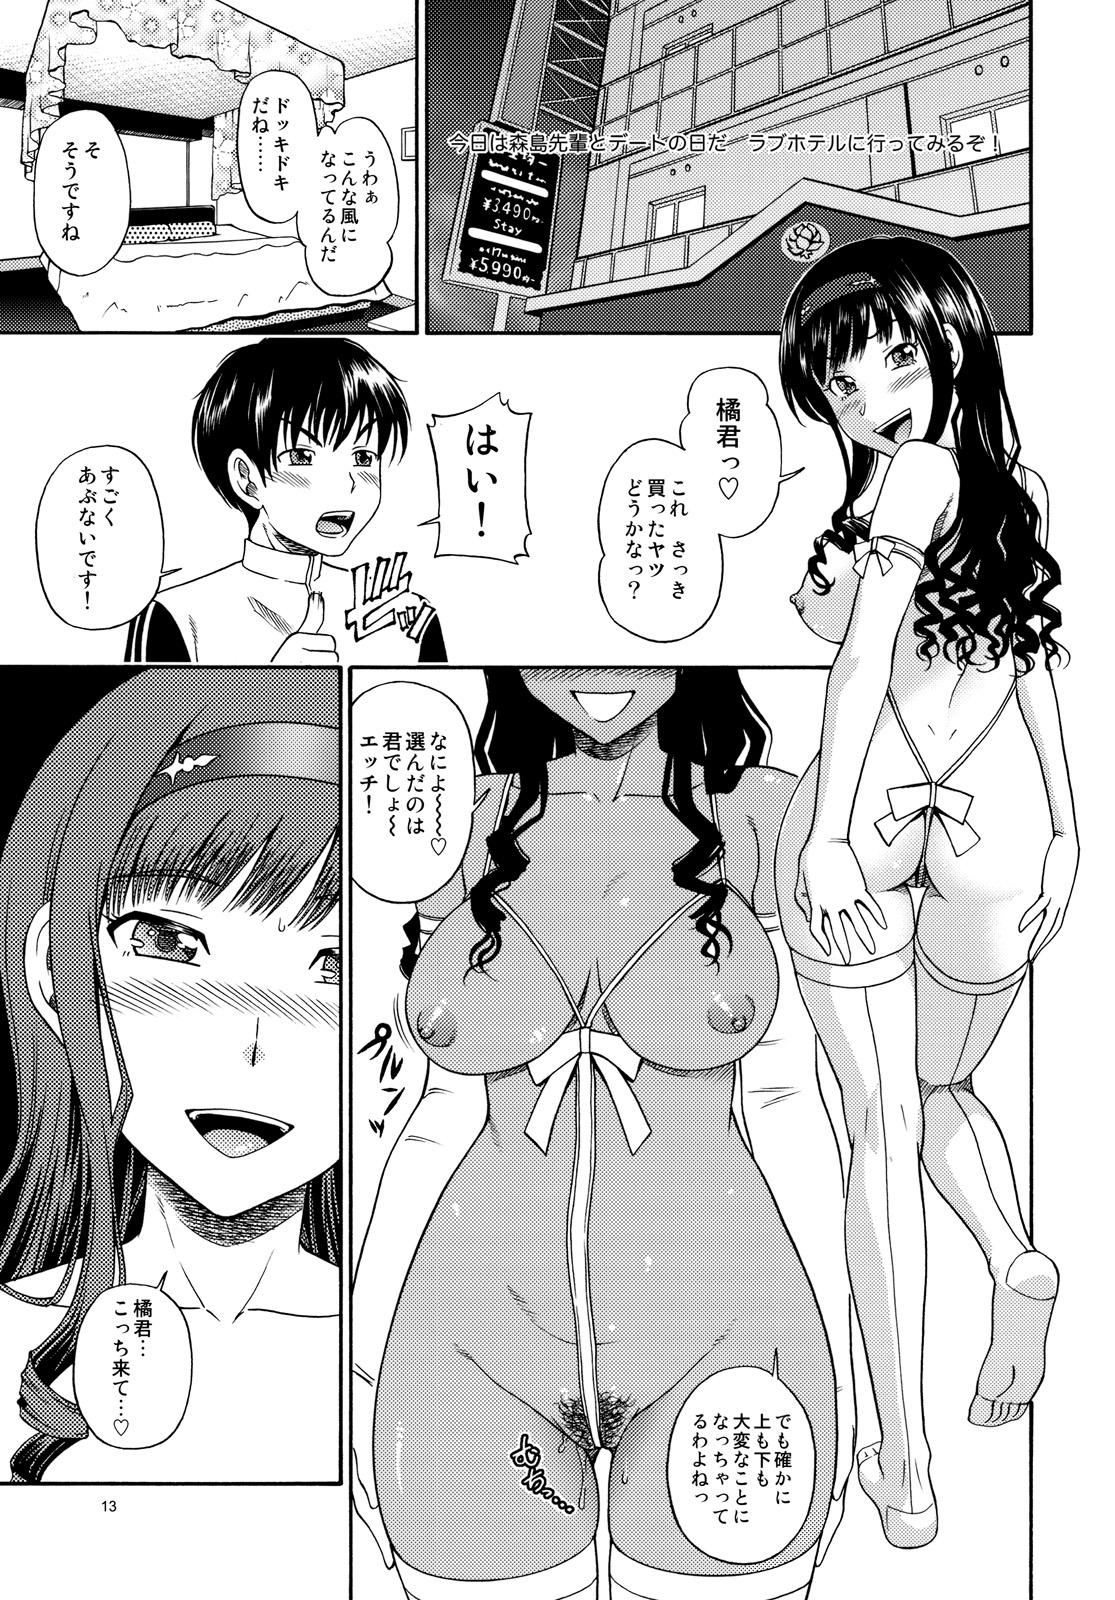 Strap On Lovely Kyousei Event - Amagami Skype - Page 12